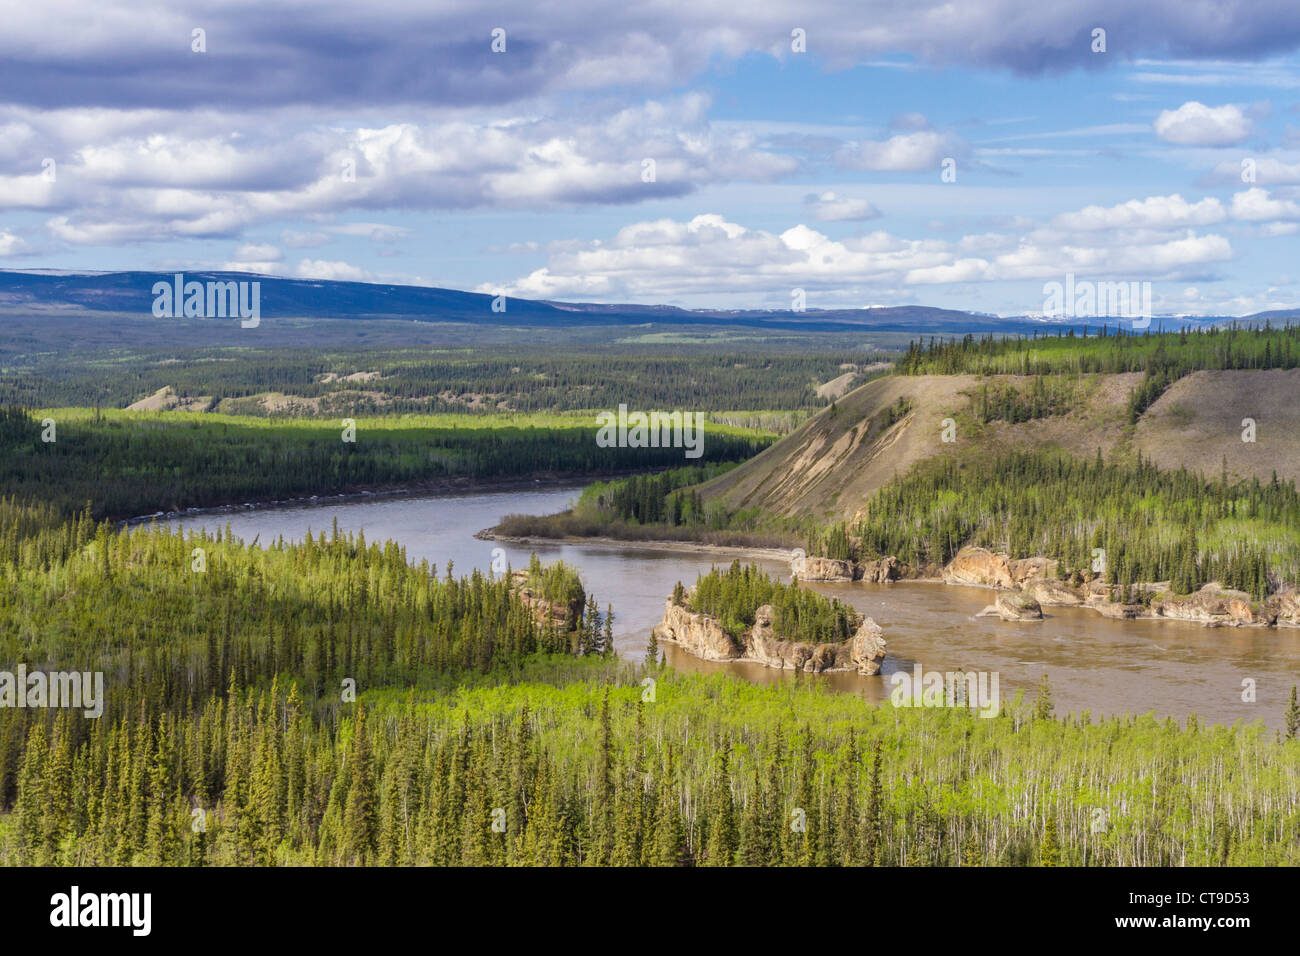 'Five Finger Rapids' on the Yukon River, Canada, a famous obstacle for Paddle boat steamers during the Klondike Gold Rush. Stock Photo